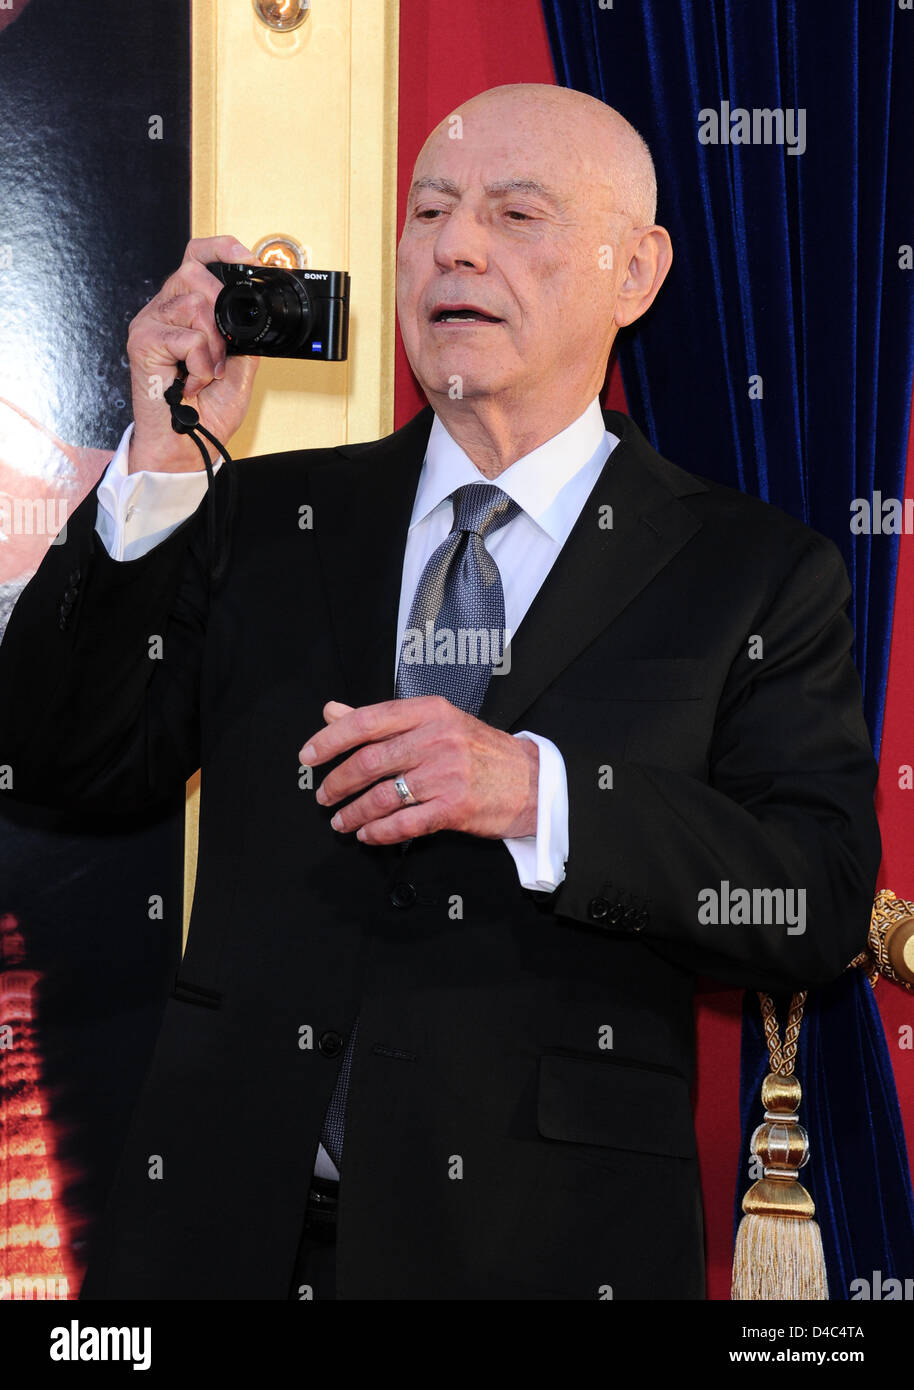 Los Angeles, USA. 11th March 2013. Alan Arkin arrives at the film premiere for The Incredible Burt Wonderstone at the Chinese theatre in Hollywood.  Credit:  Sydney Alford / Alamy Live News Stock Photo